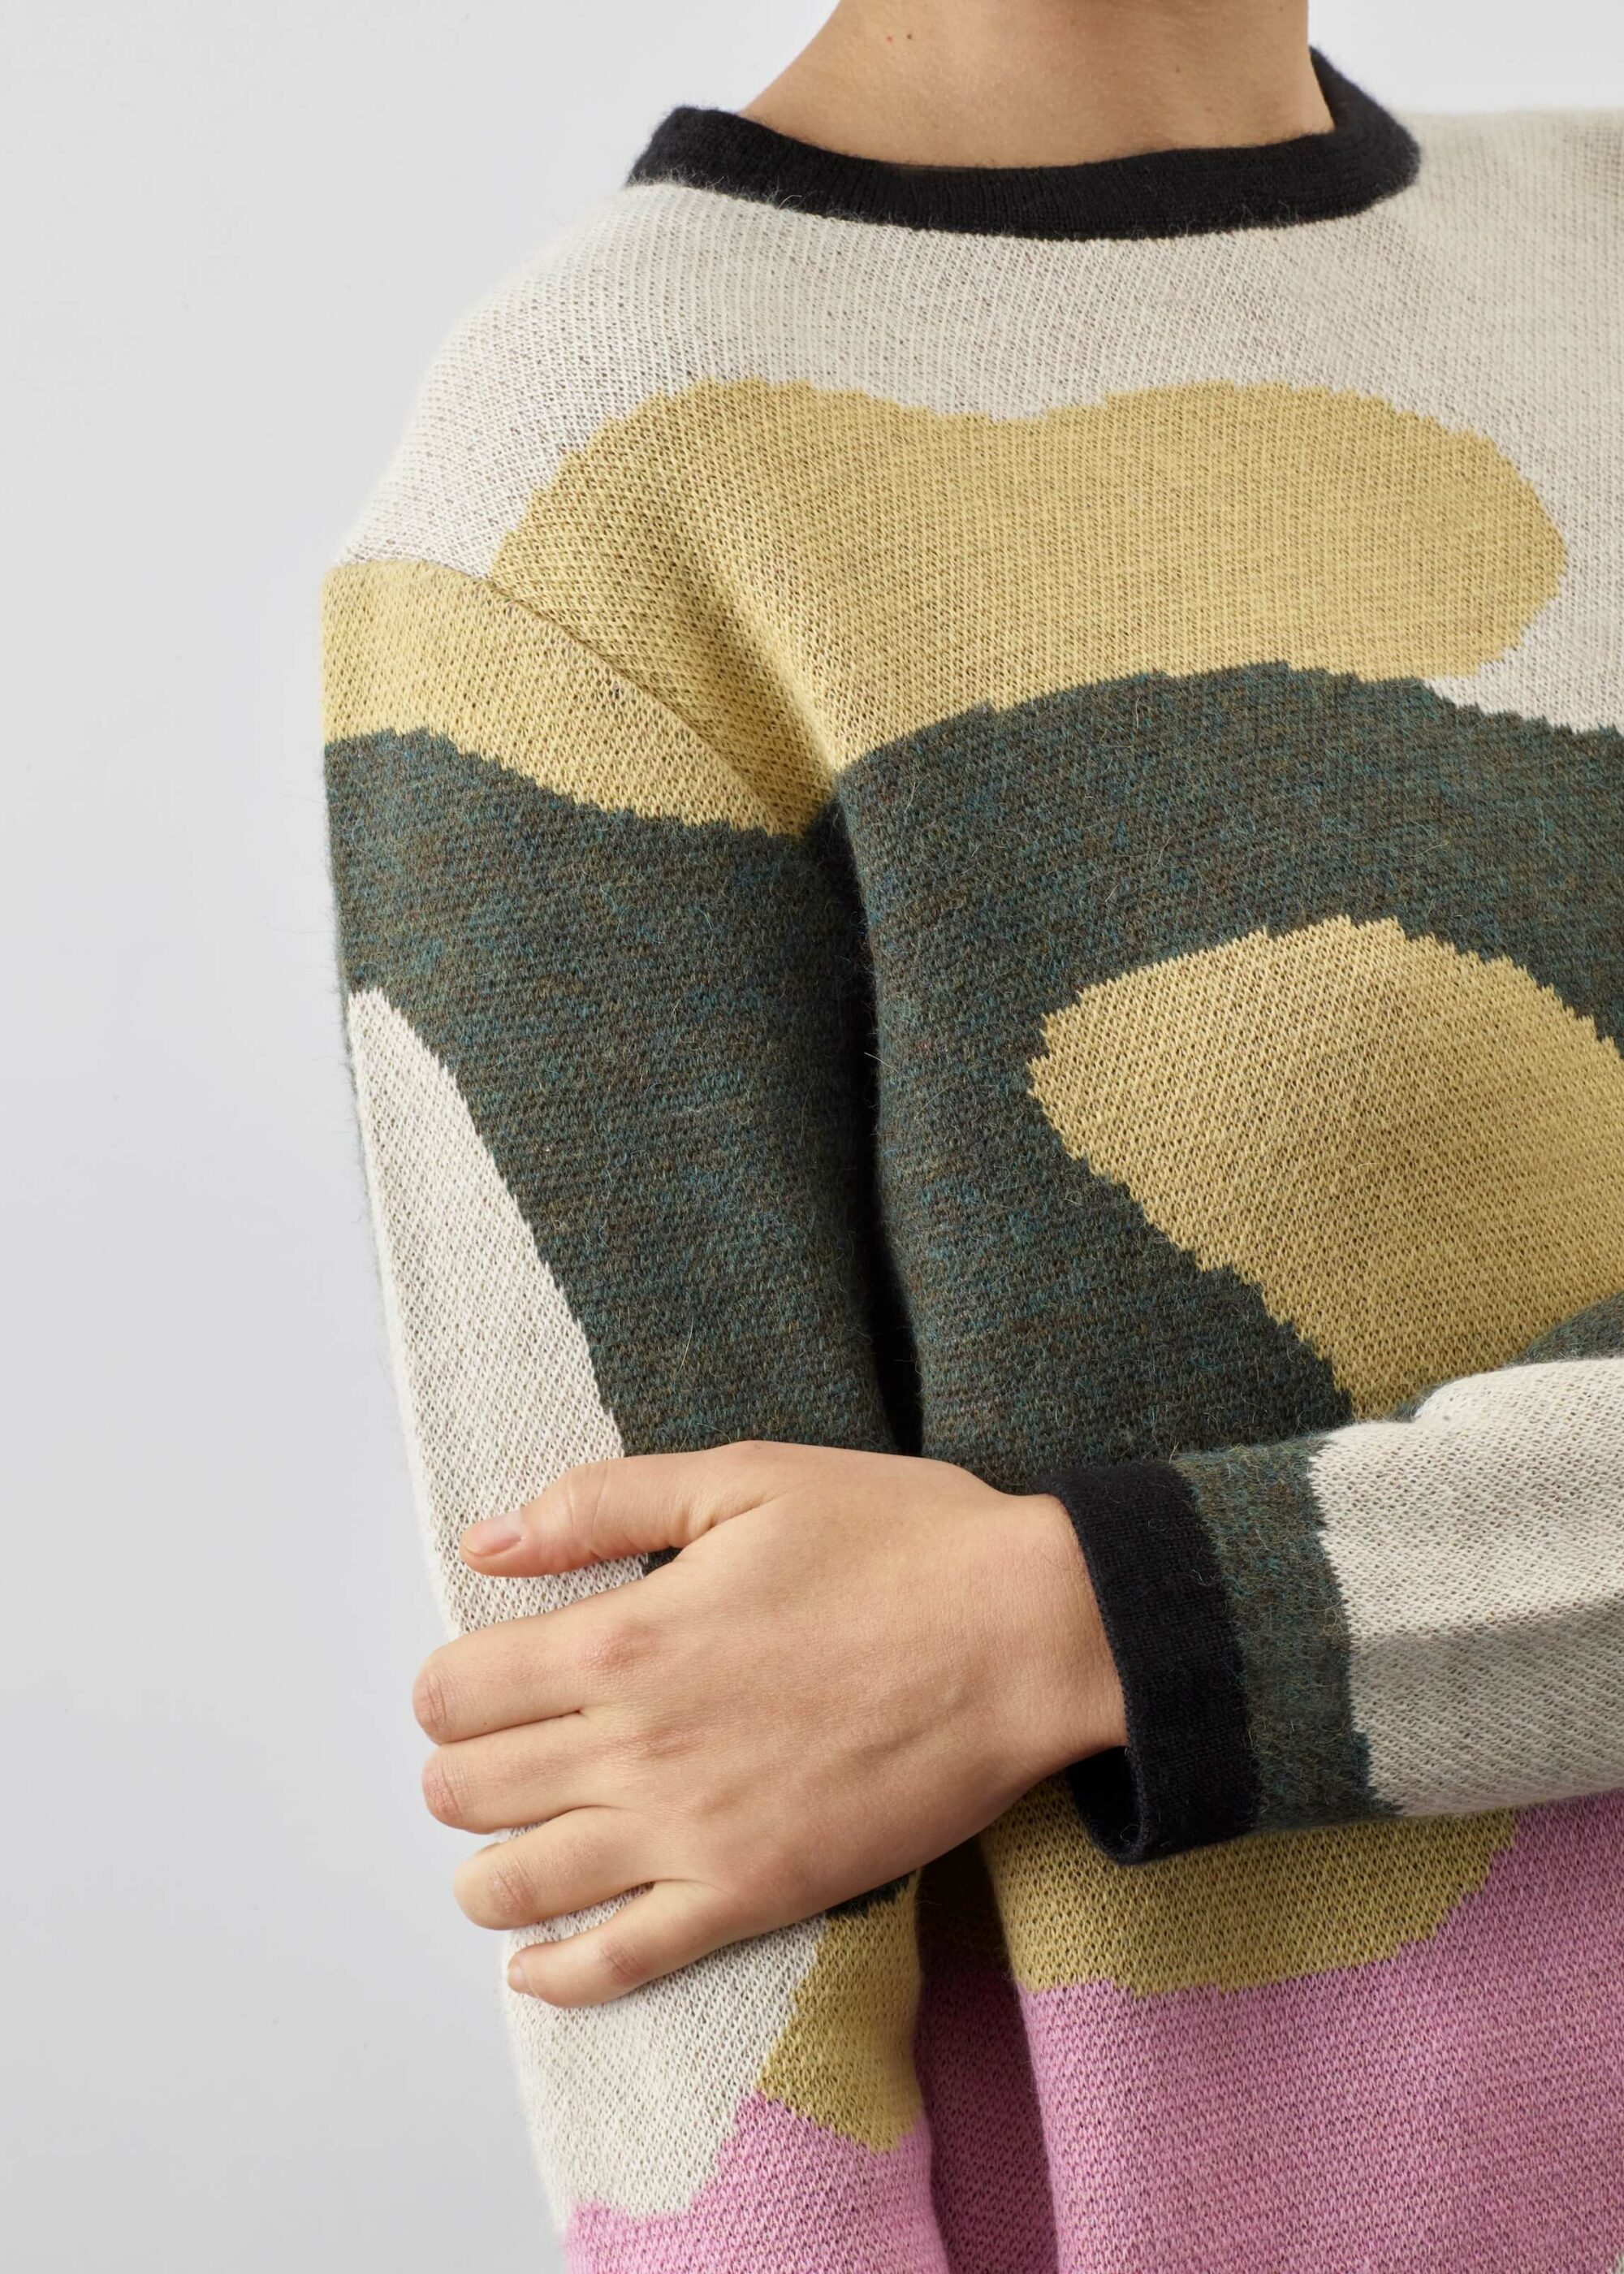 Product image for »Corbusier« Jacquard Sweater Baby Alpaca